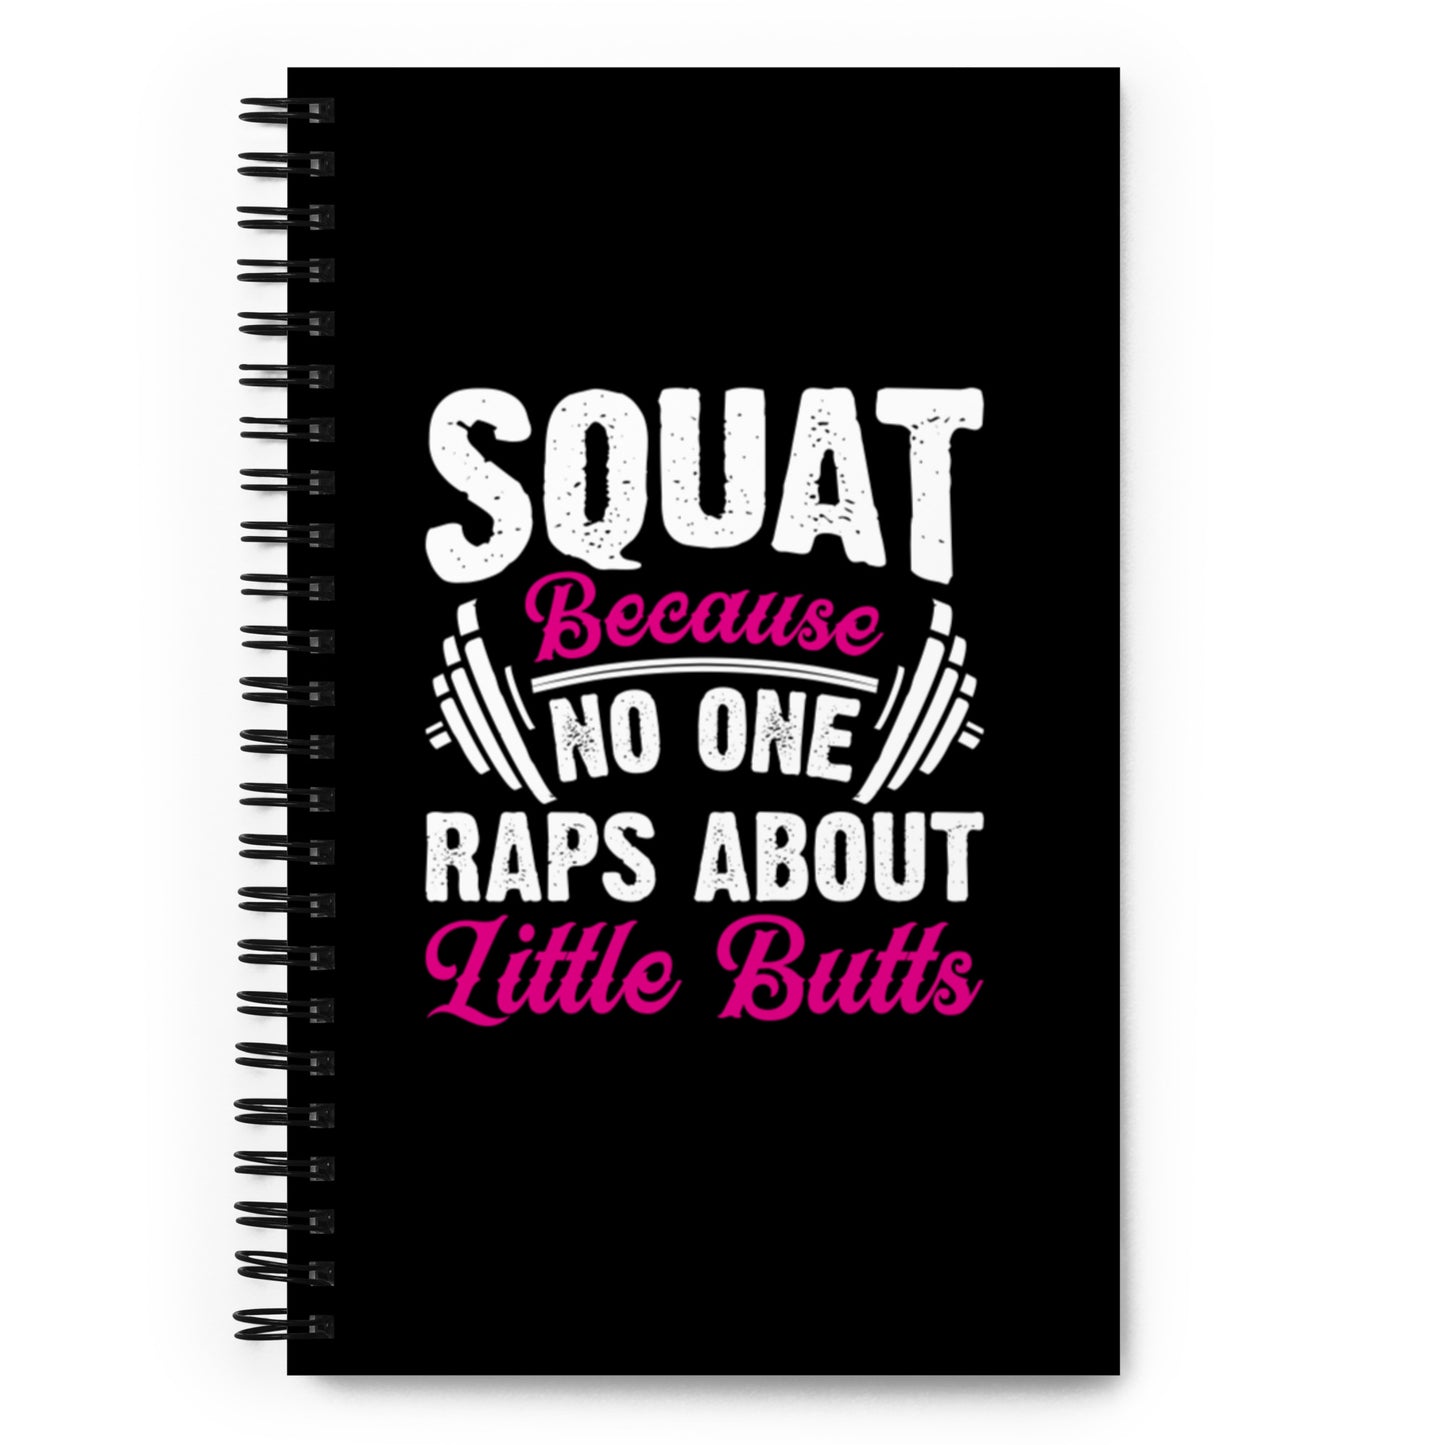 Squat Because No One Raps About Little Butts Spiral notebook